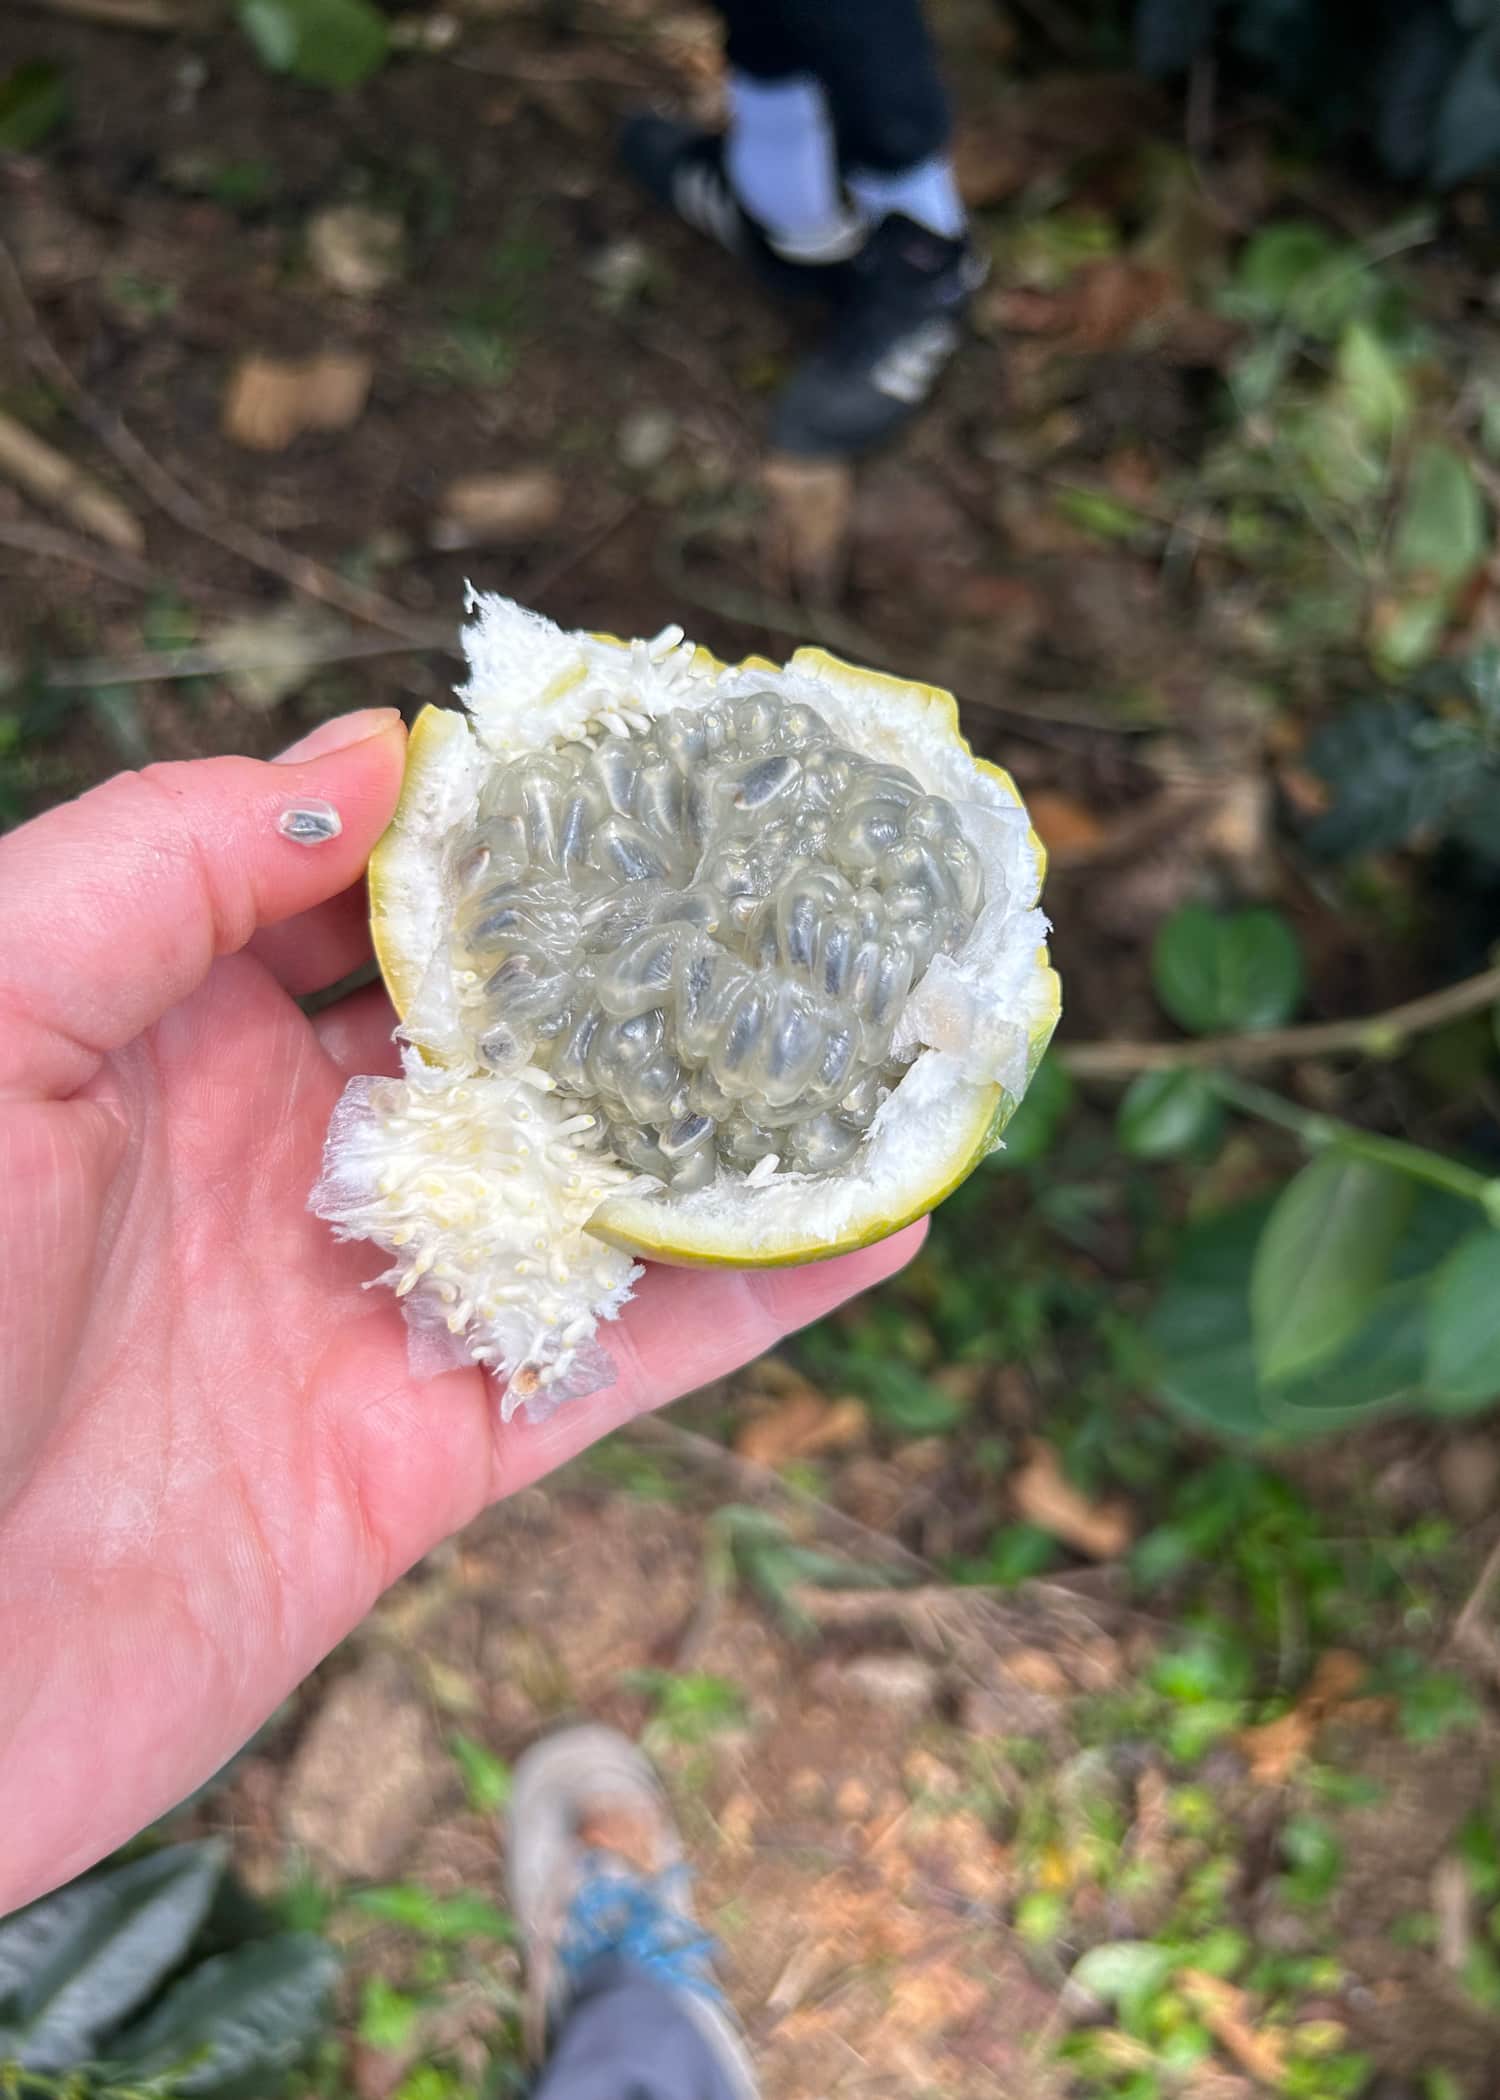 The granadilla fruit pictured here is closely related to the passion fruit but with much more sweetness and texture.